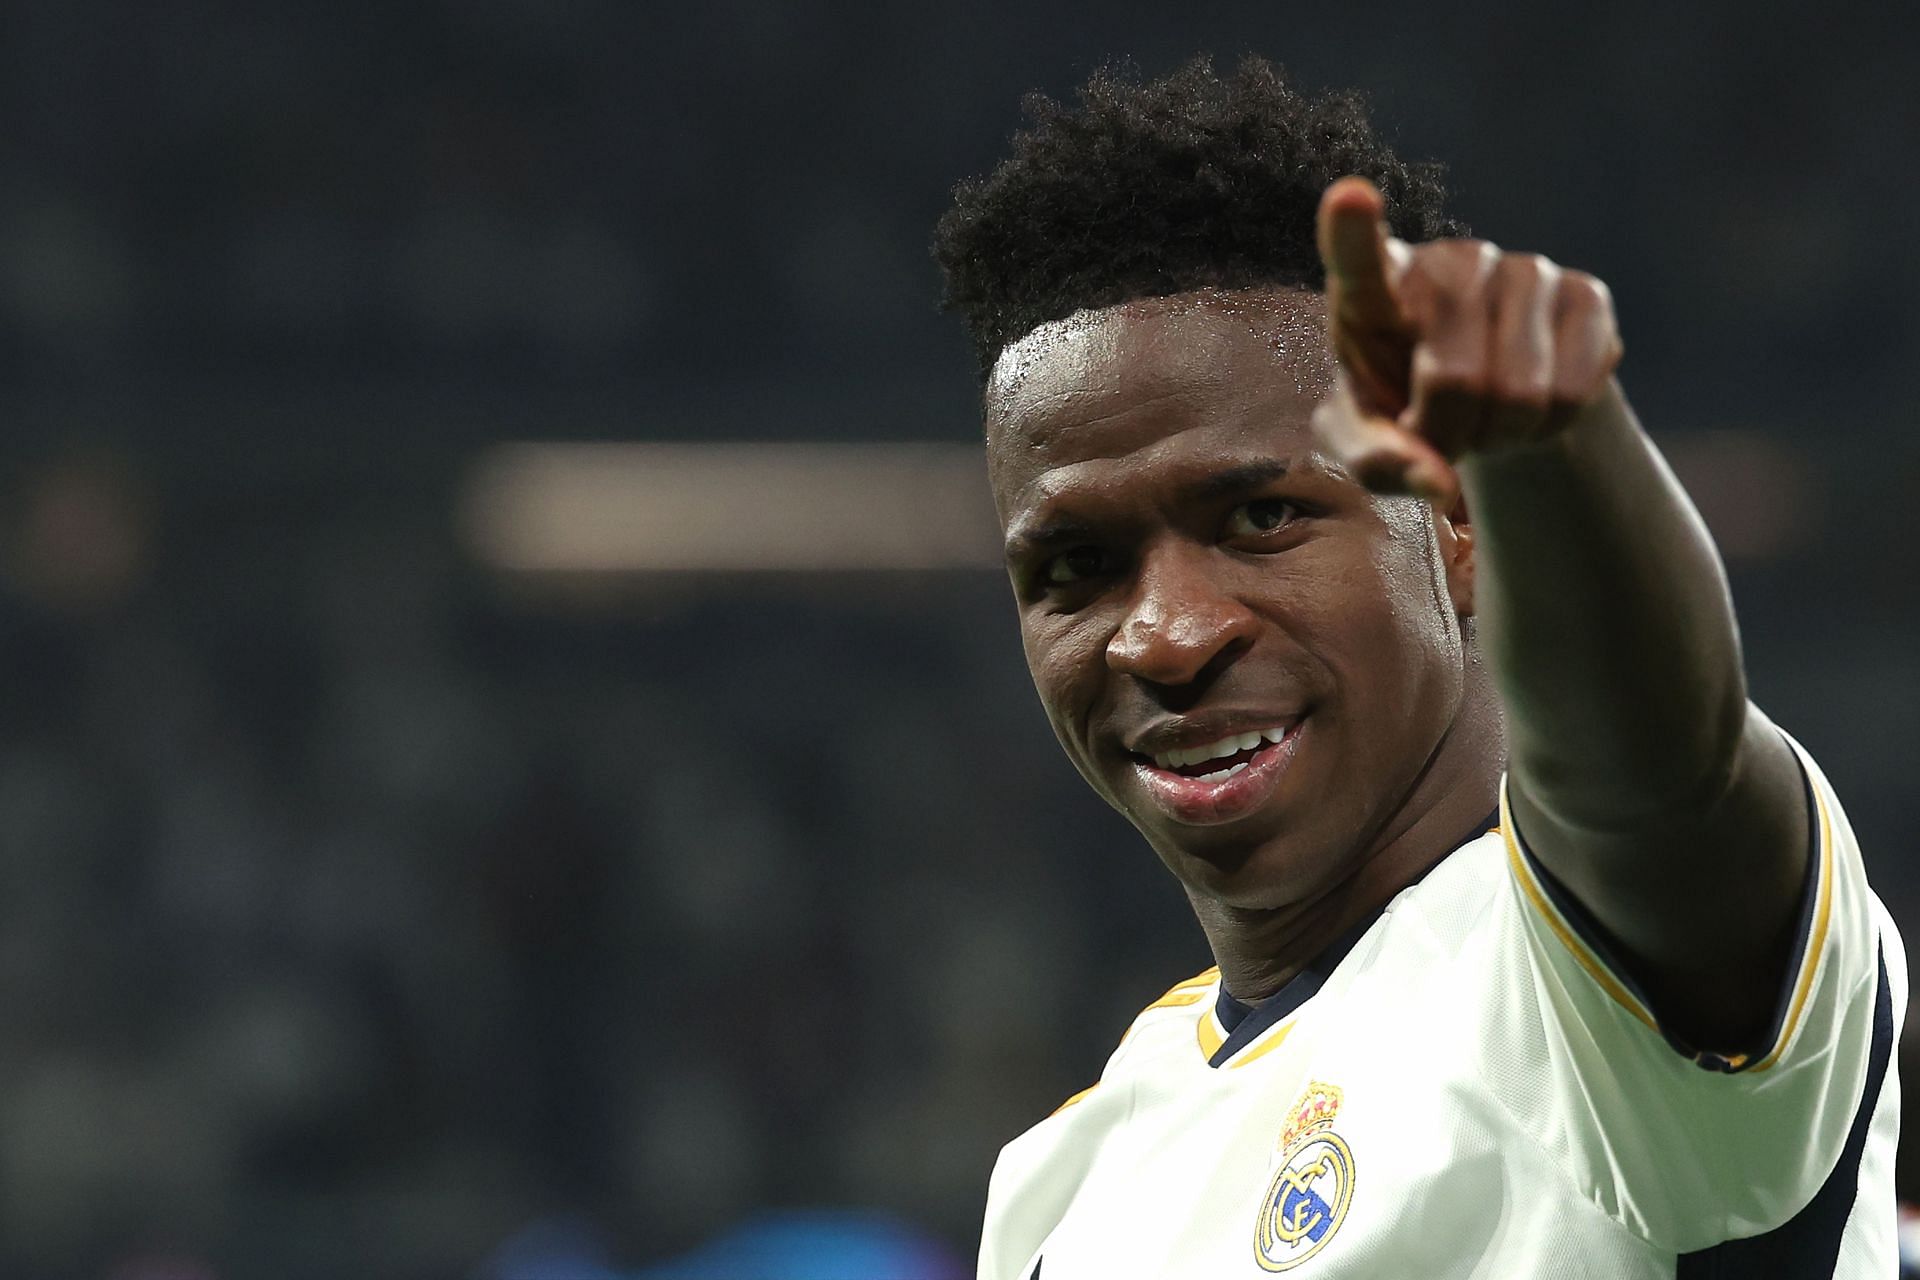 Vinicius was delighted to help Real Madrid reach the final.